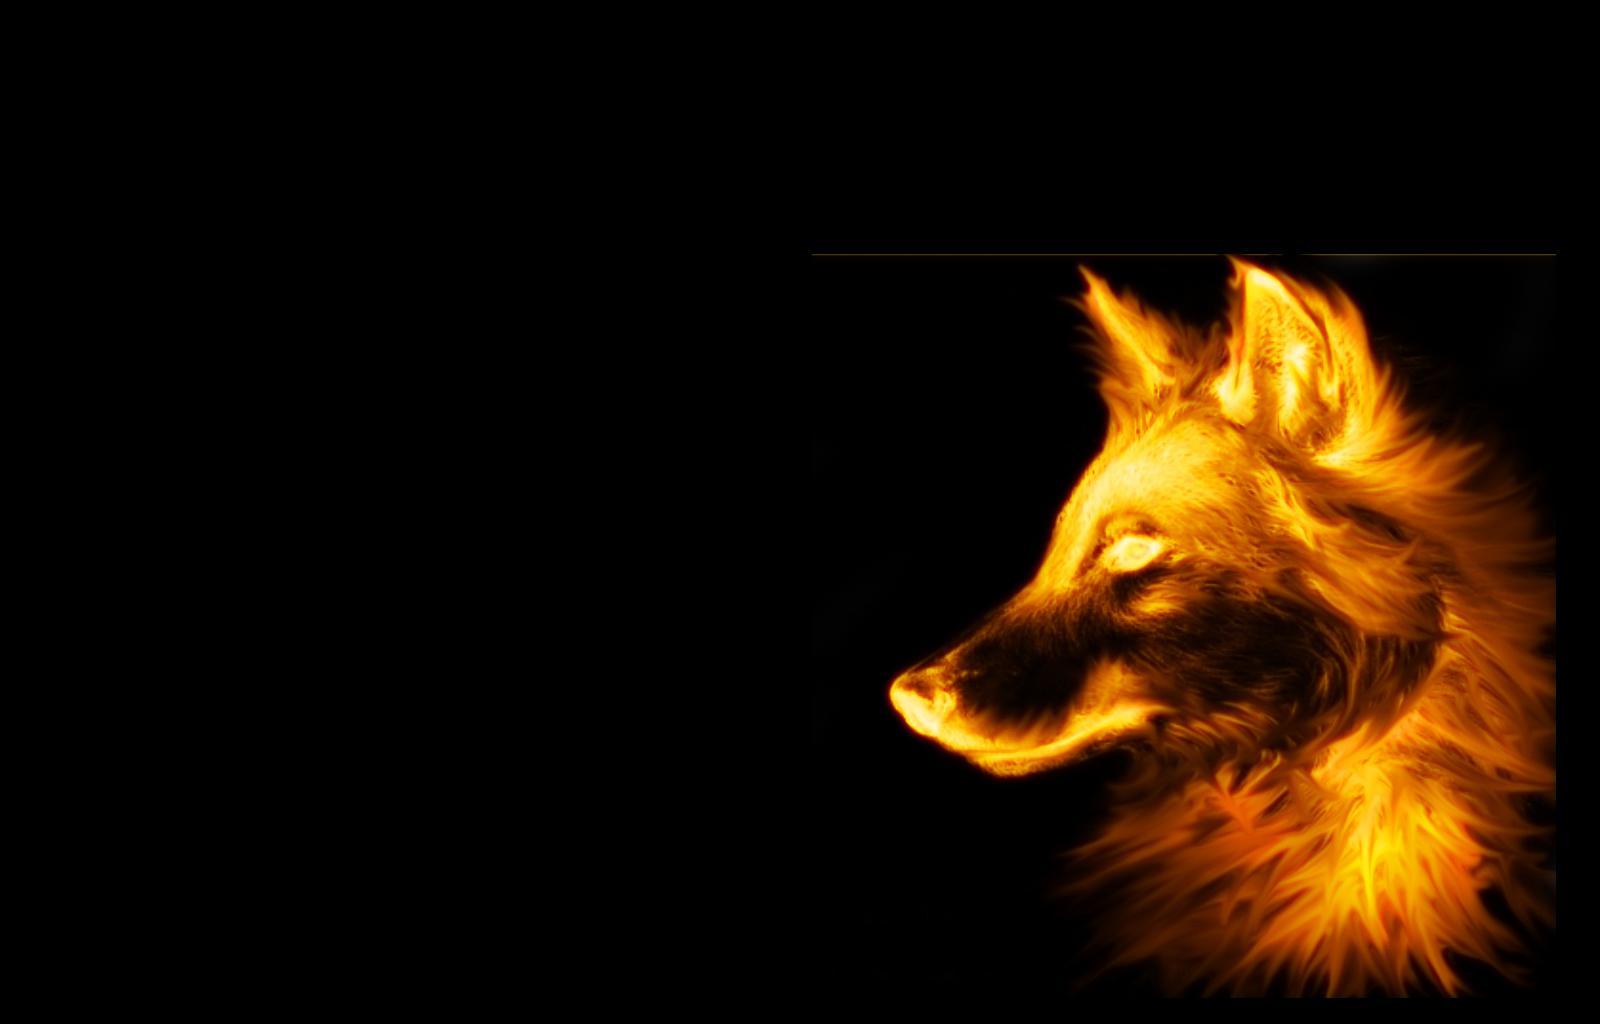 Black Background Wallpaper on Fire Wolf Black Background Hd Wallpaper   Wild Animal   Reptiles